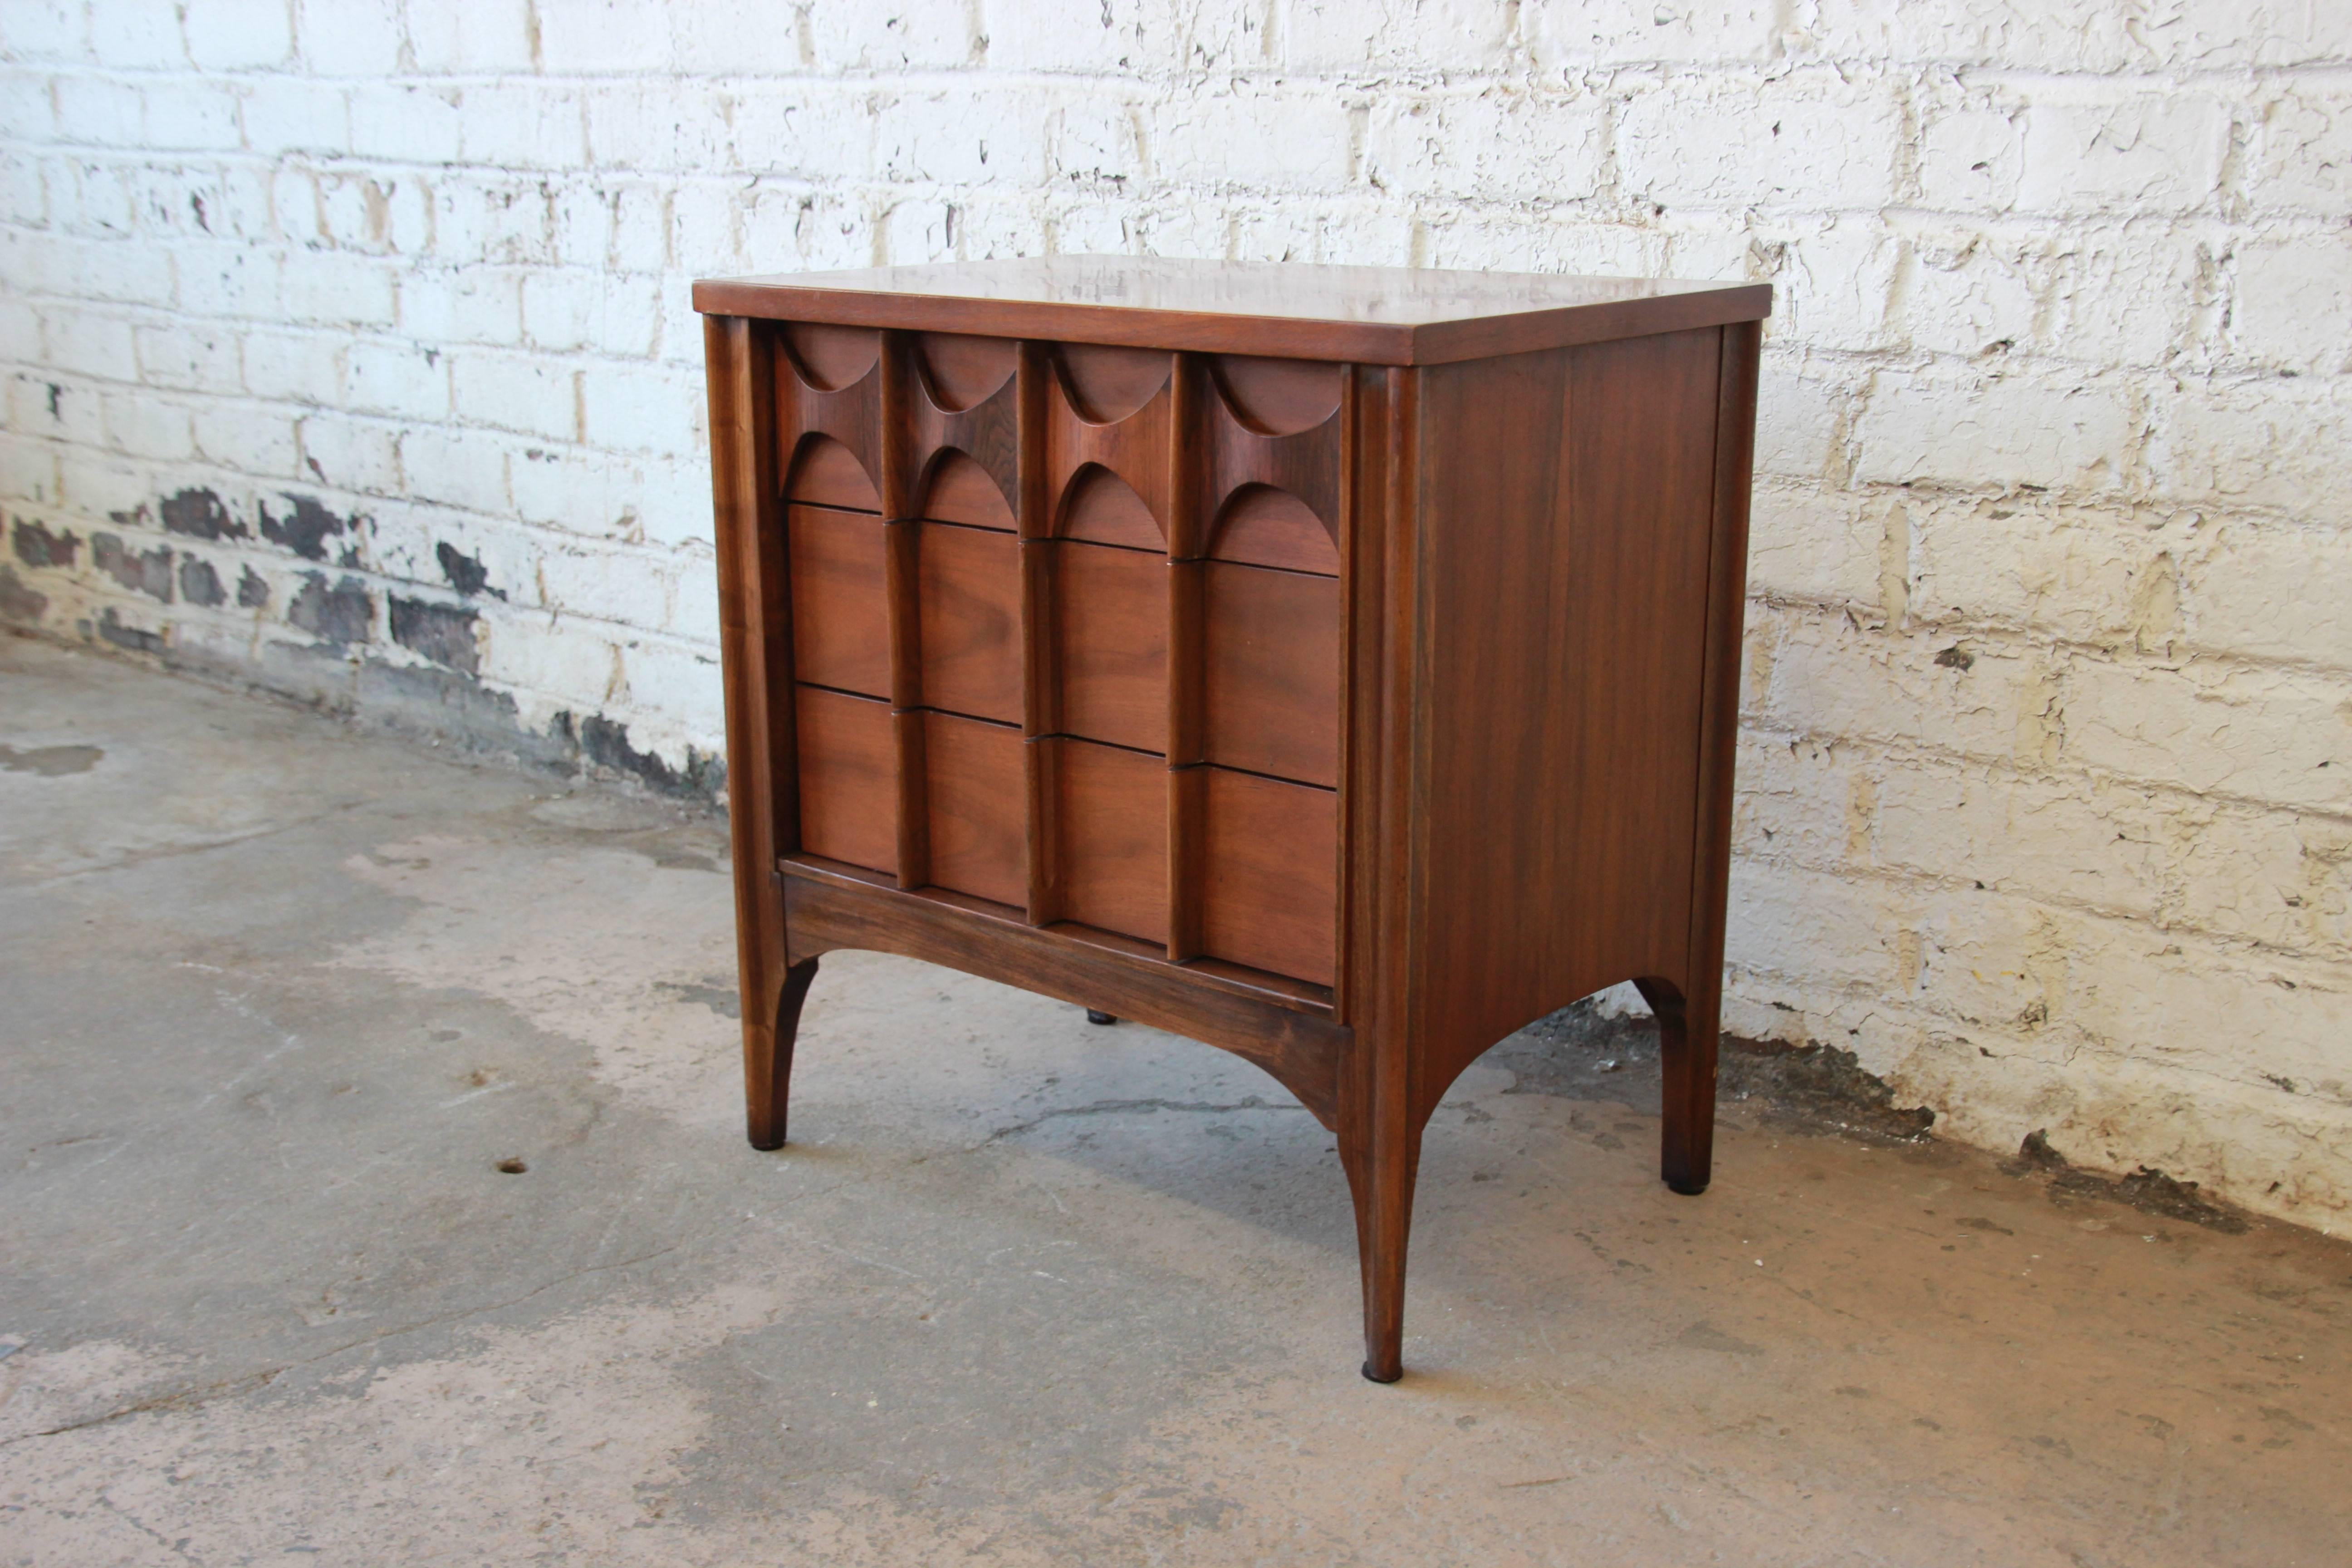 A beautiful Mid-Century Modern sculpted walnut and rosewood nightstand or end table from the 